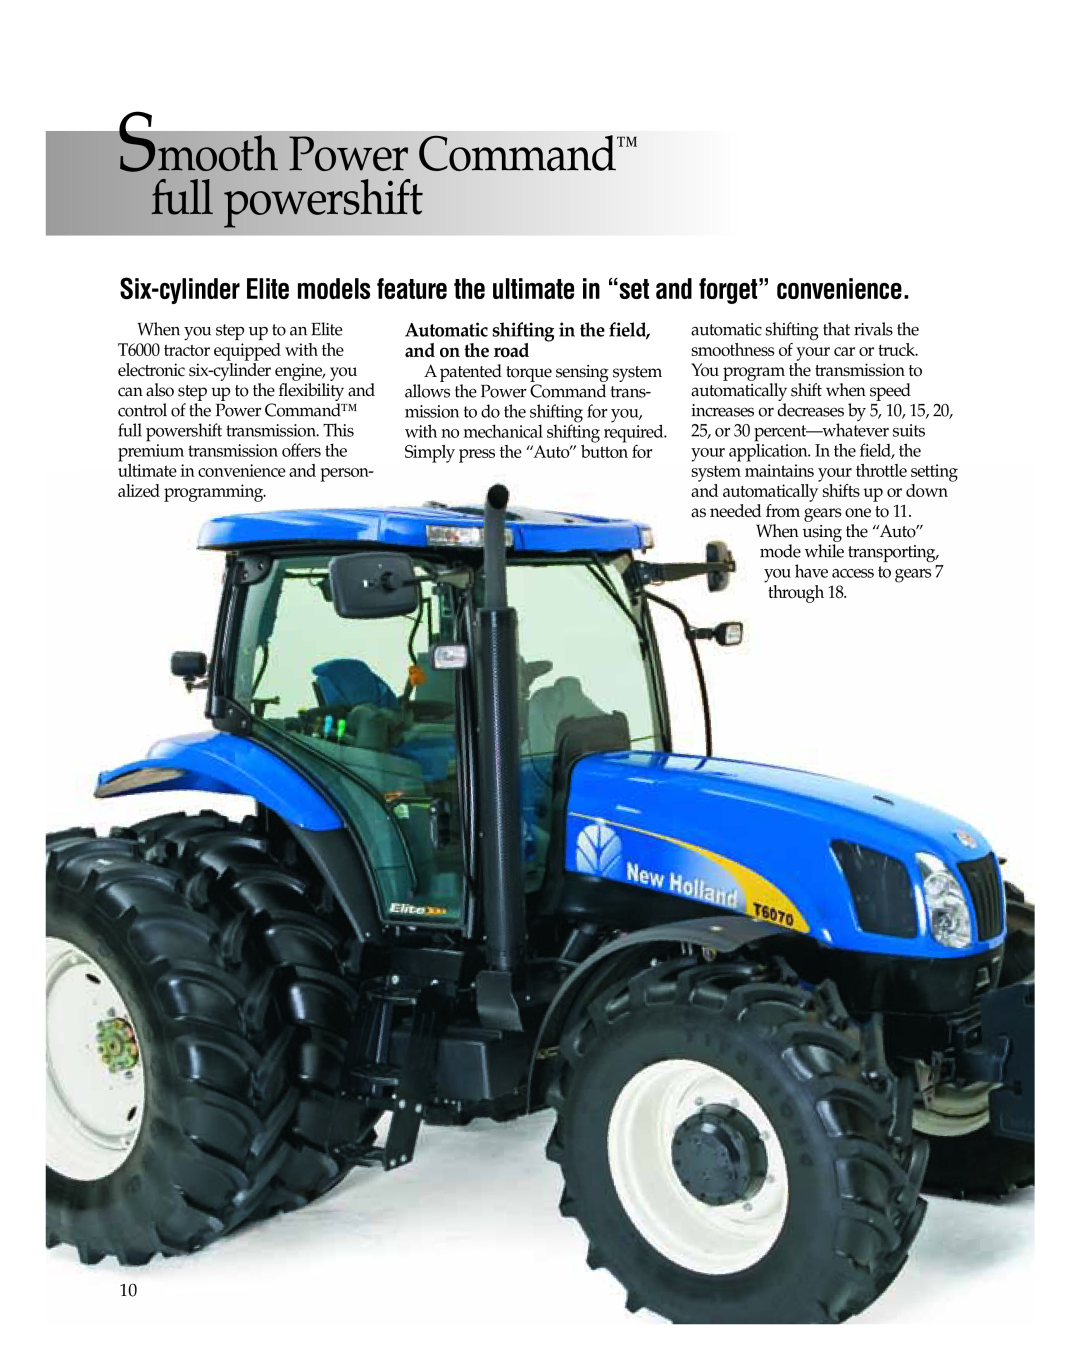 New Holland T6080, T6040, T6060 manual Automatic shifting in the field, and on the road, Smooth Power Command full powershift 